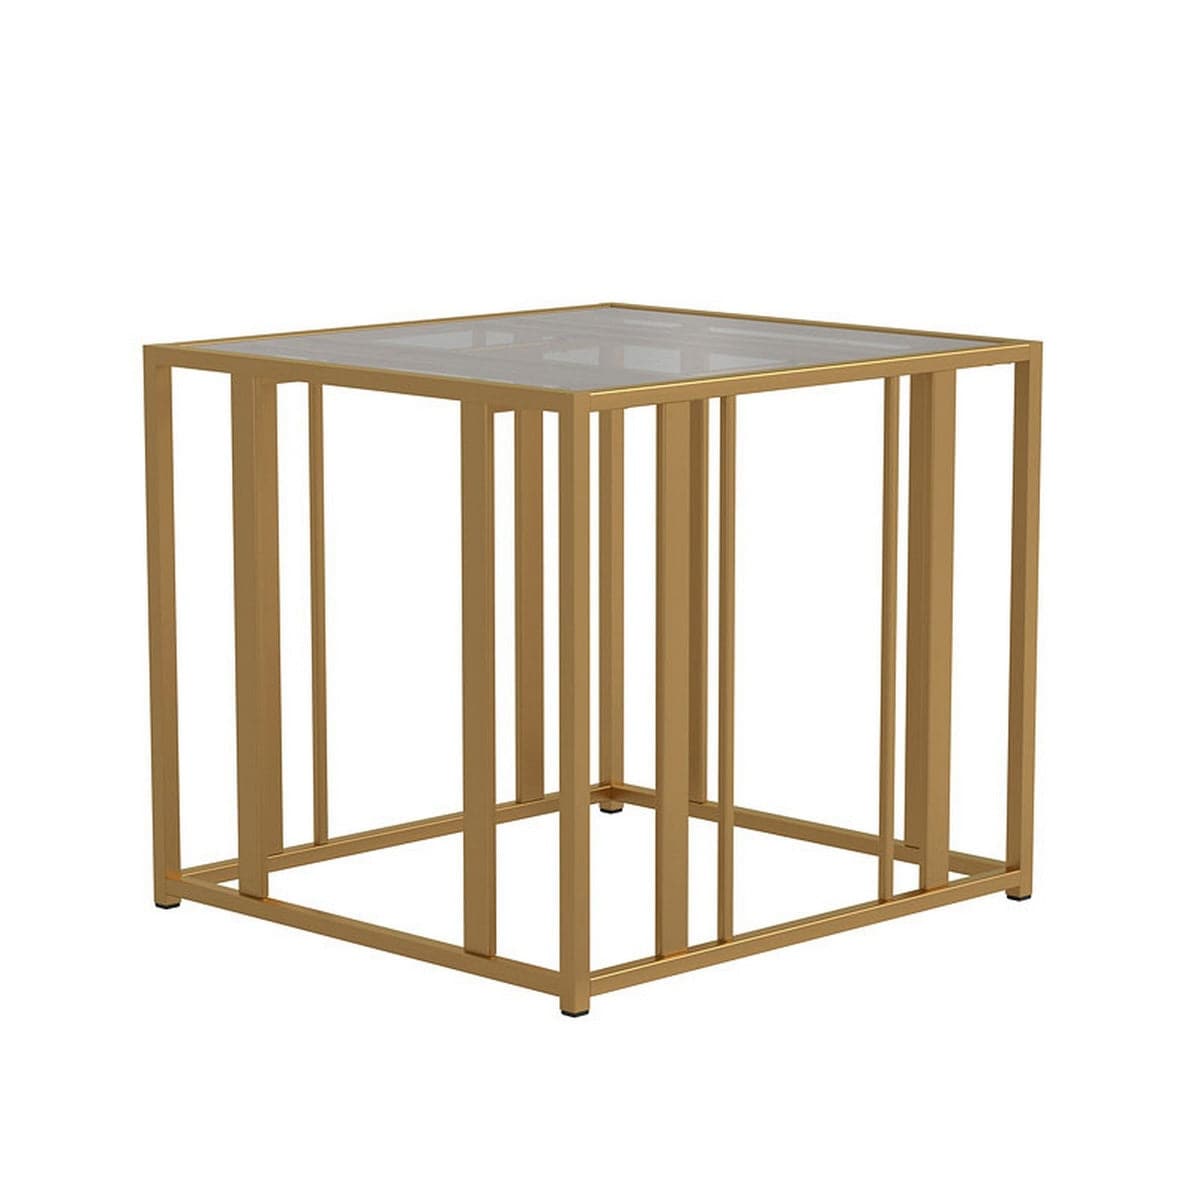 Glass Top End Table with Metal Tubular Base, Brass - 22 H x 26 W x 24 L Inches